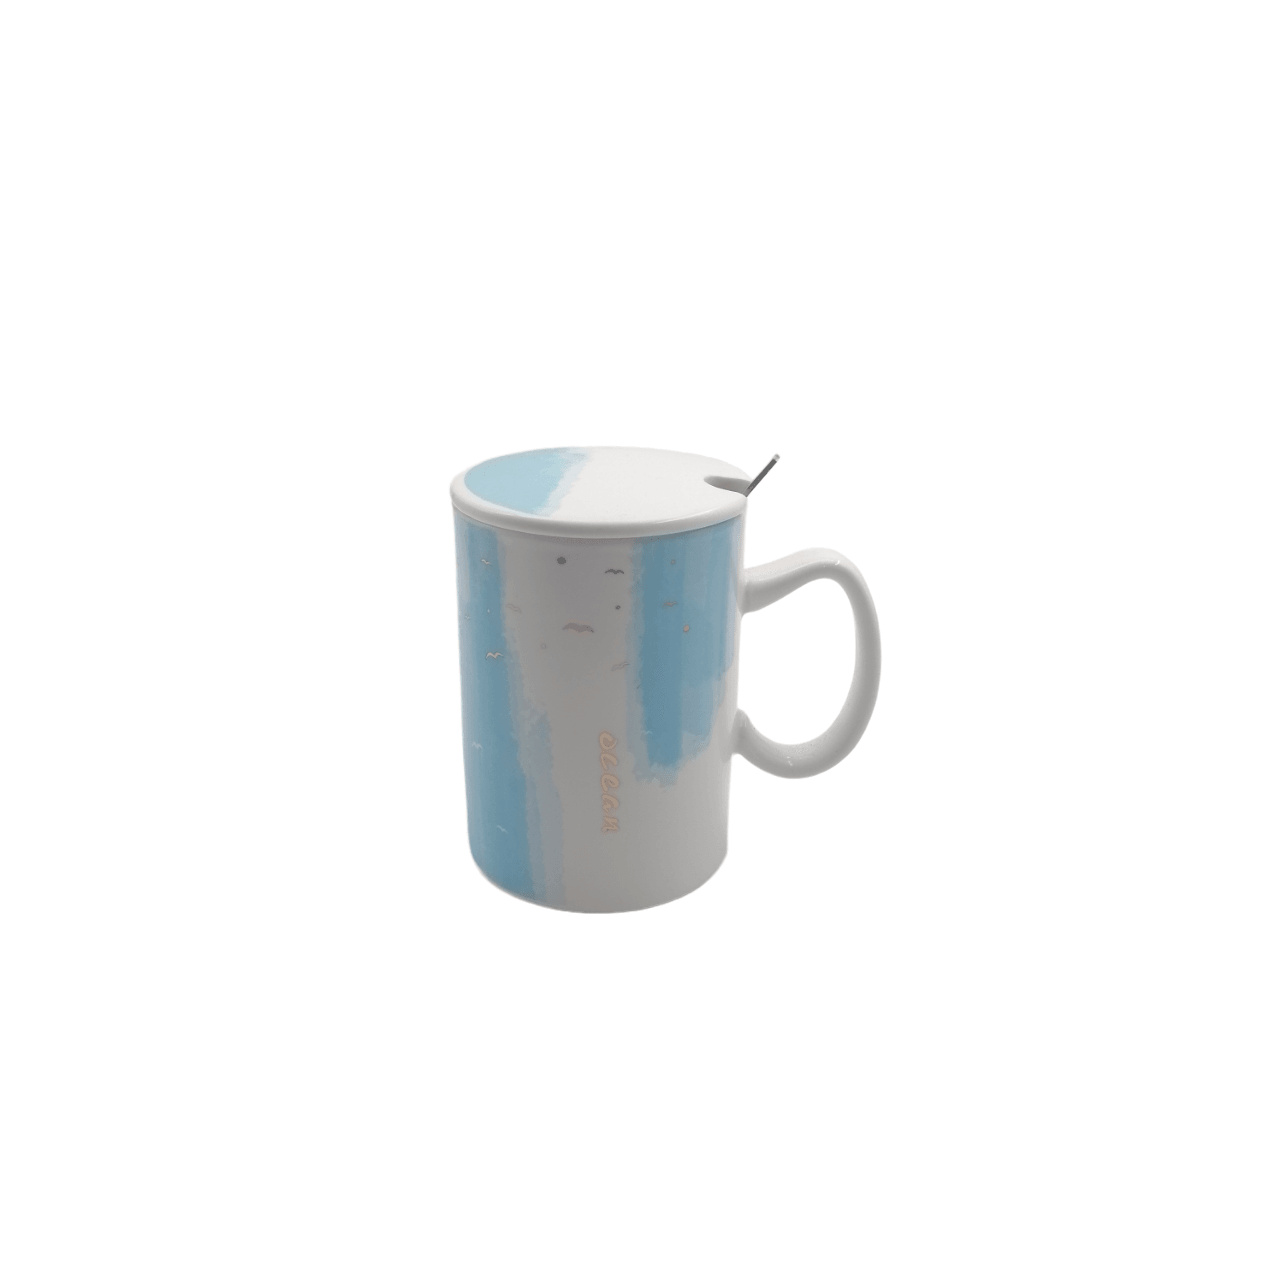 Mug with Ceramic Lid and Spoon - Home And Trends